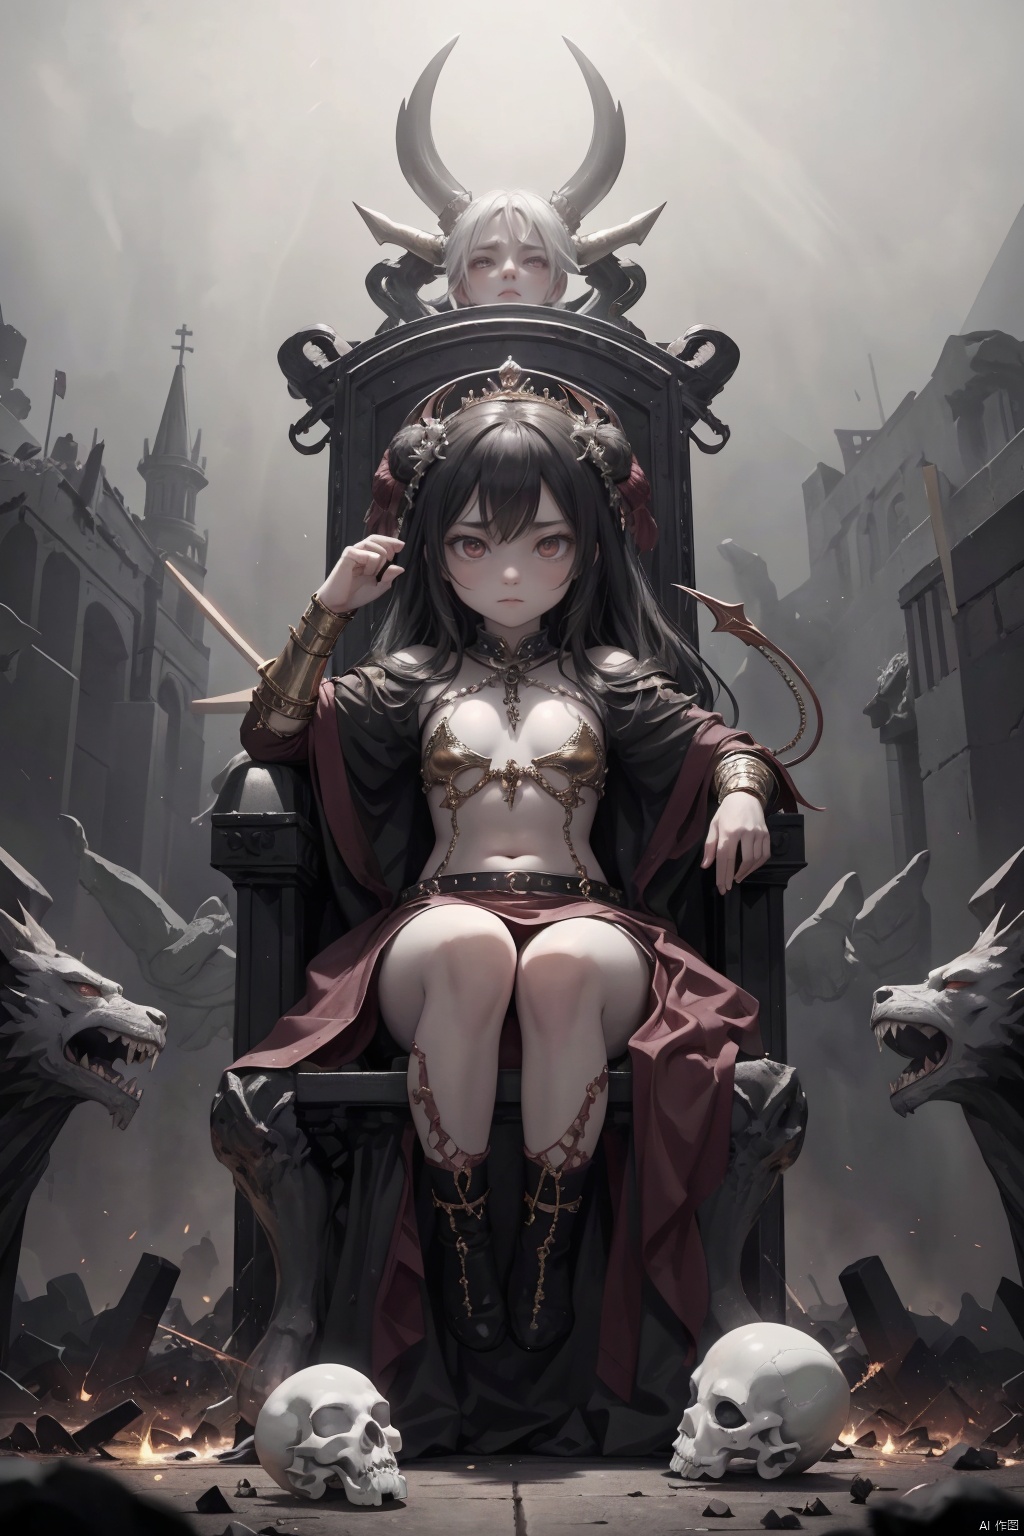  Imagine a scene where the demons, having conquered heaven, now sit upon thrones of bone and flesh, ruling over their new domain with an iron fist. The colors are dark and oppressive, with the once bright and vibrant landscape of heaven now twisted and corrupted by demonic influence.